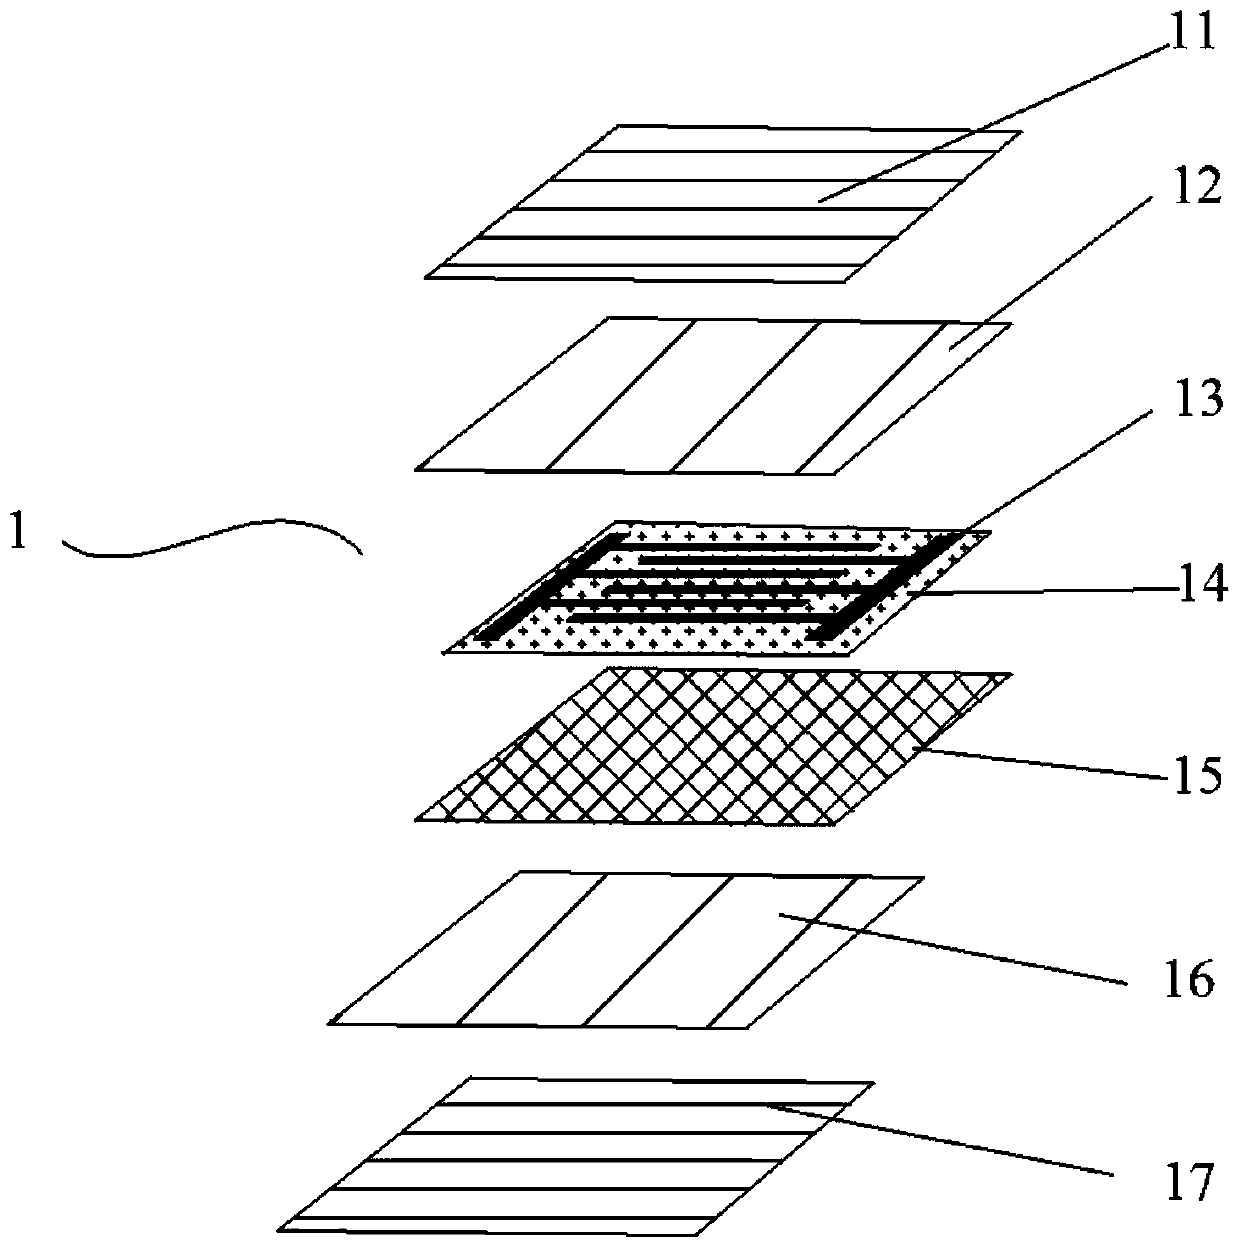 Graphene heat-emitting film assembly with single-side far infrared radiation function and bed warmer based on graphene heat-emitting membrane assembly